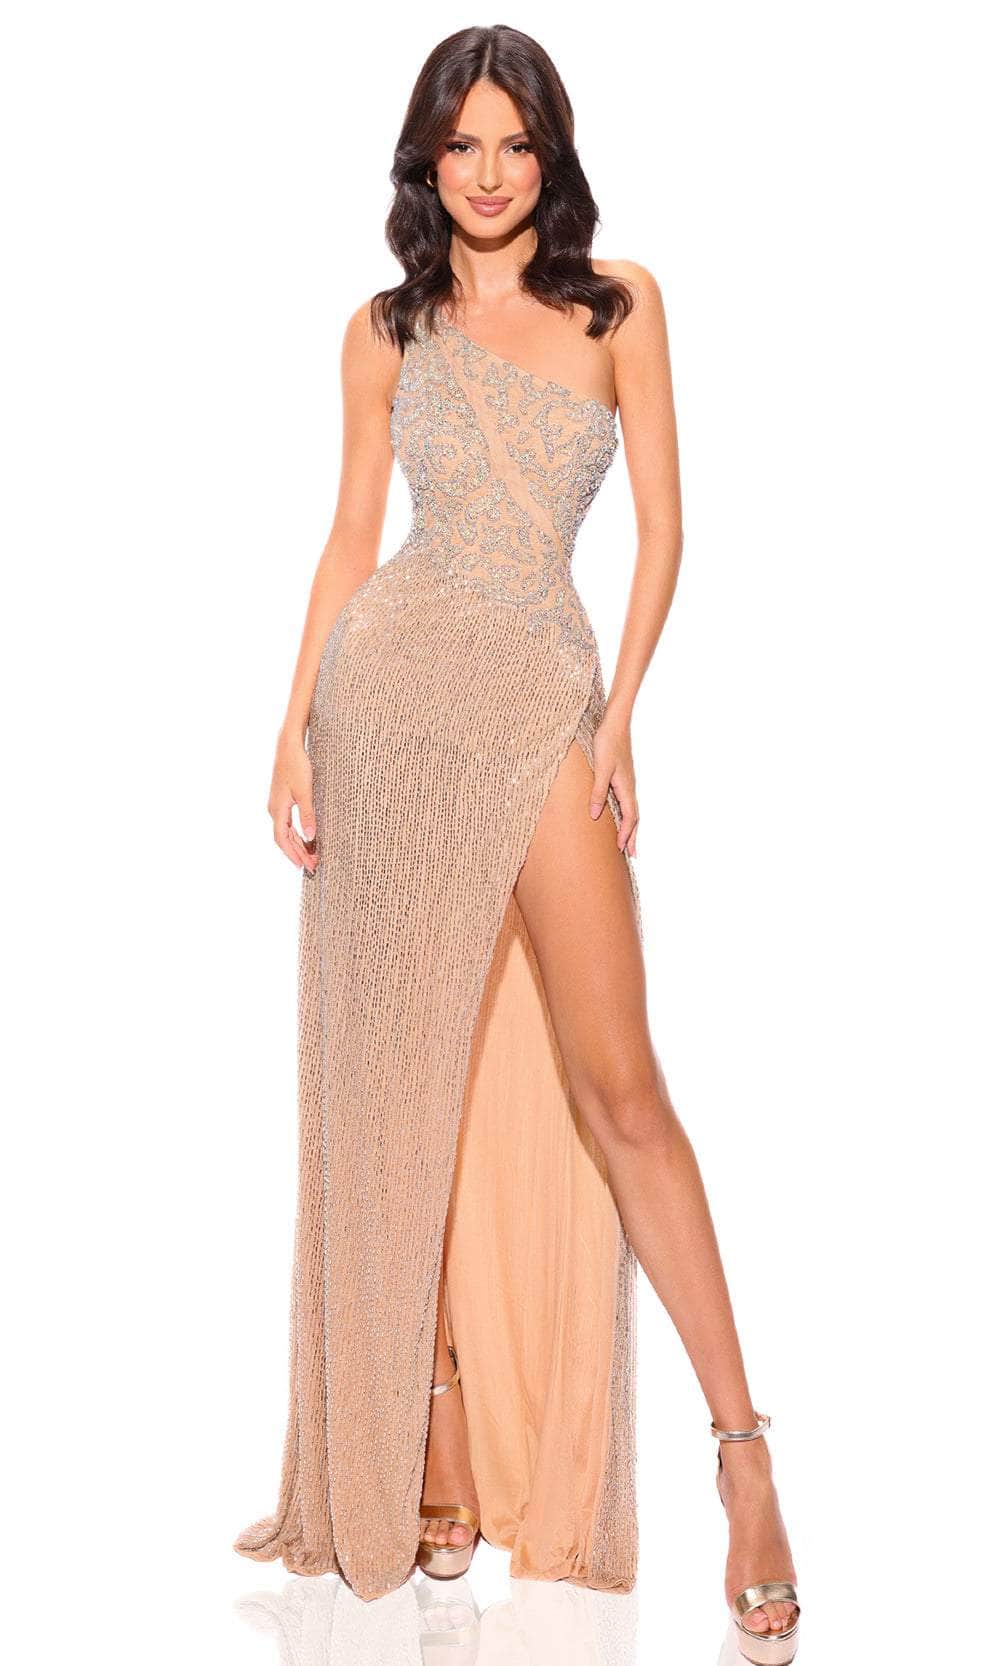 Amarra 94013 - Beaded Cut-Out Evening Dress 00 / Nude/Silver